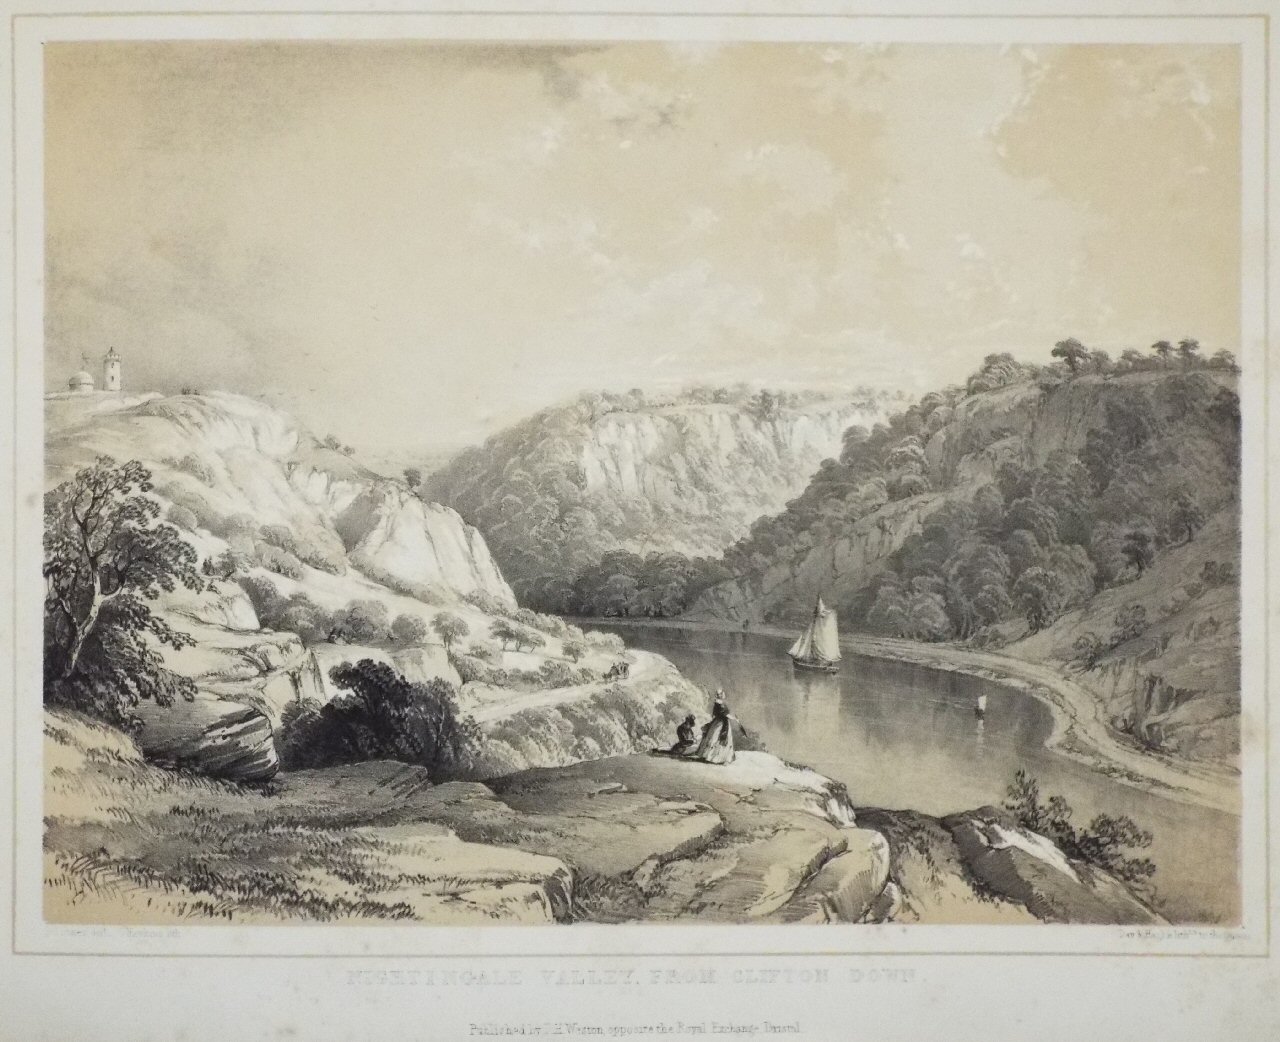 Lithograph - Nightingale Valley, from Clifton Down. - Hawkins